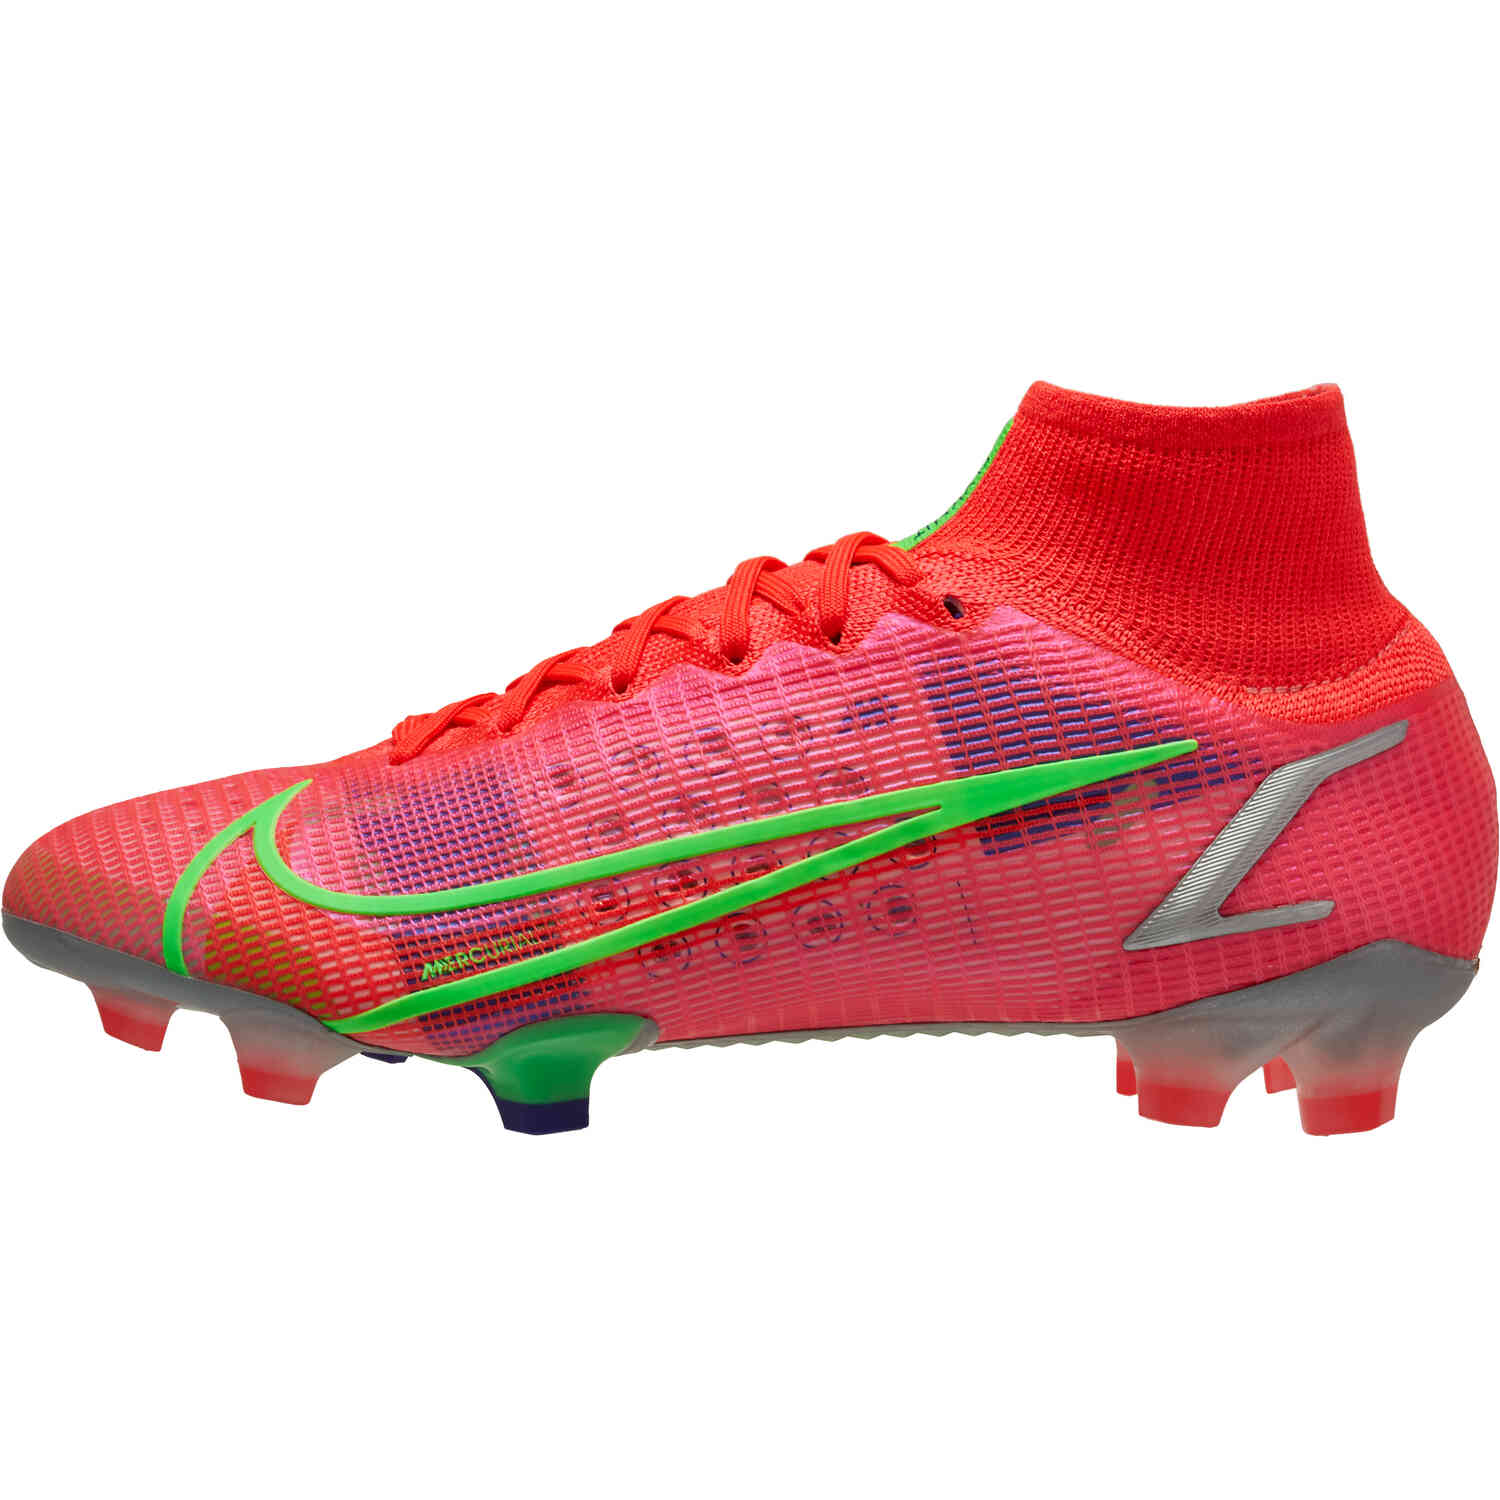 Nike Mercurial Superfly Elite FG Firm-Ground Soccer Cleats ...